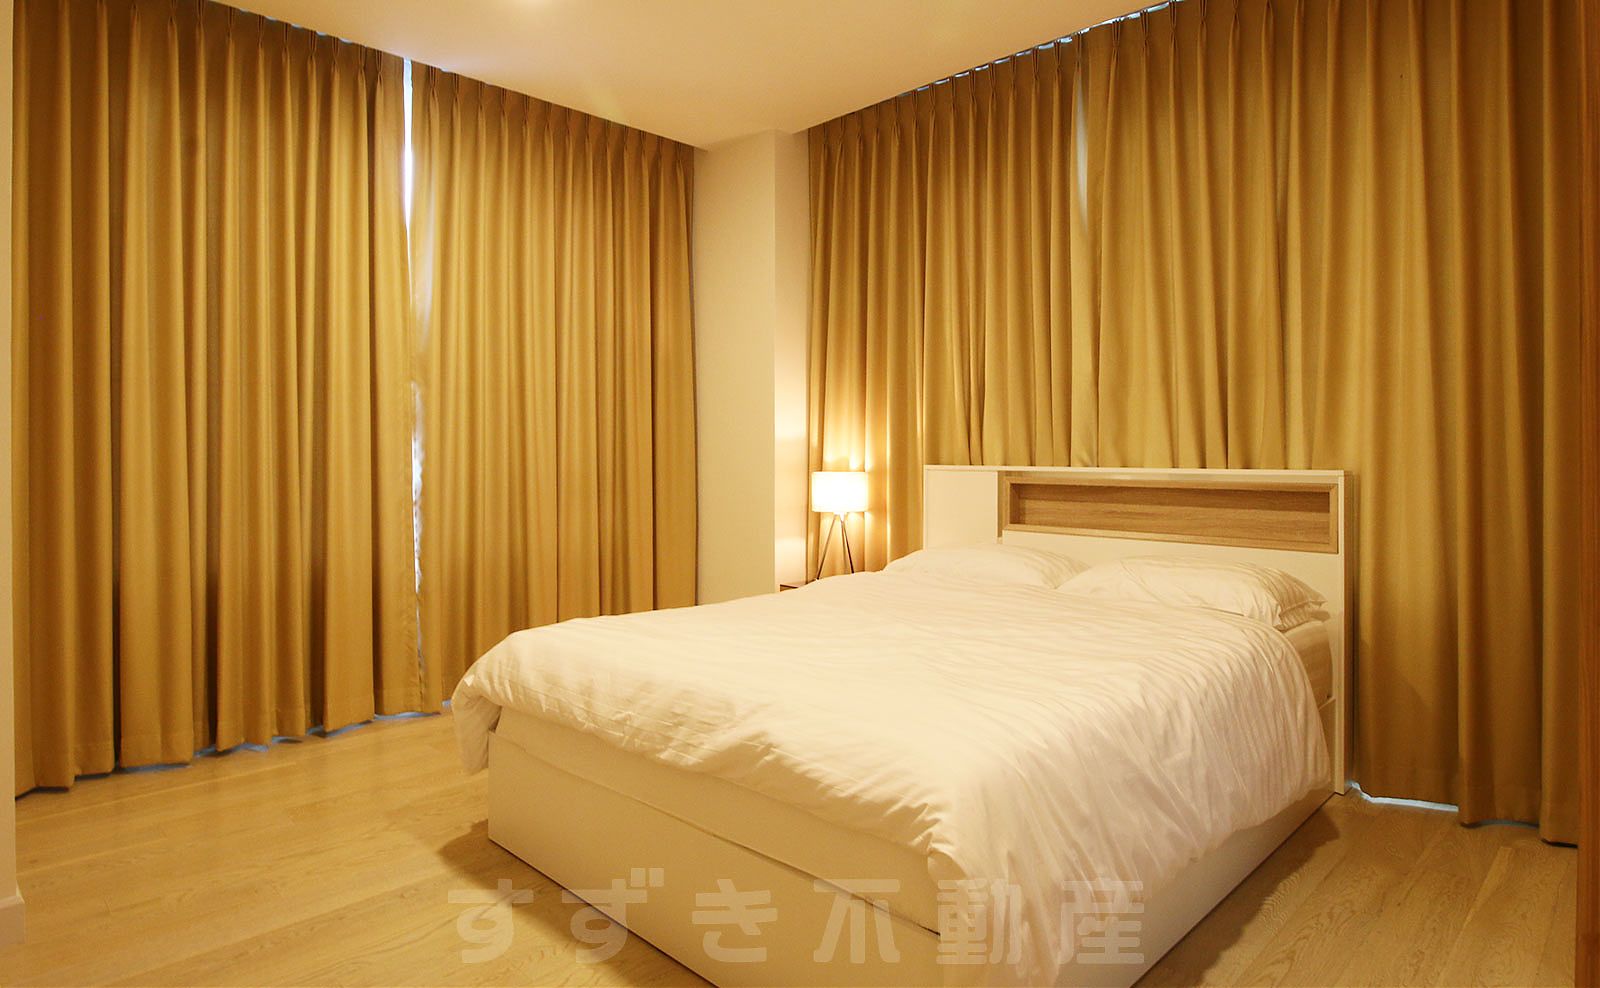 RQ Residence:3Bed Room Photos No.10